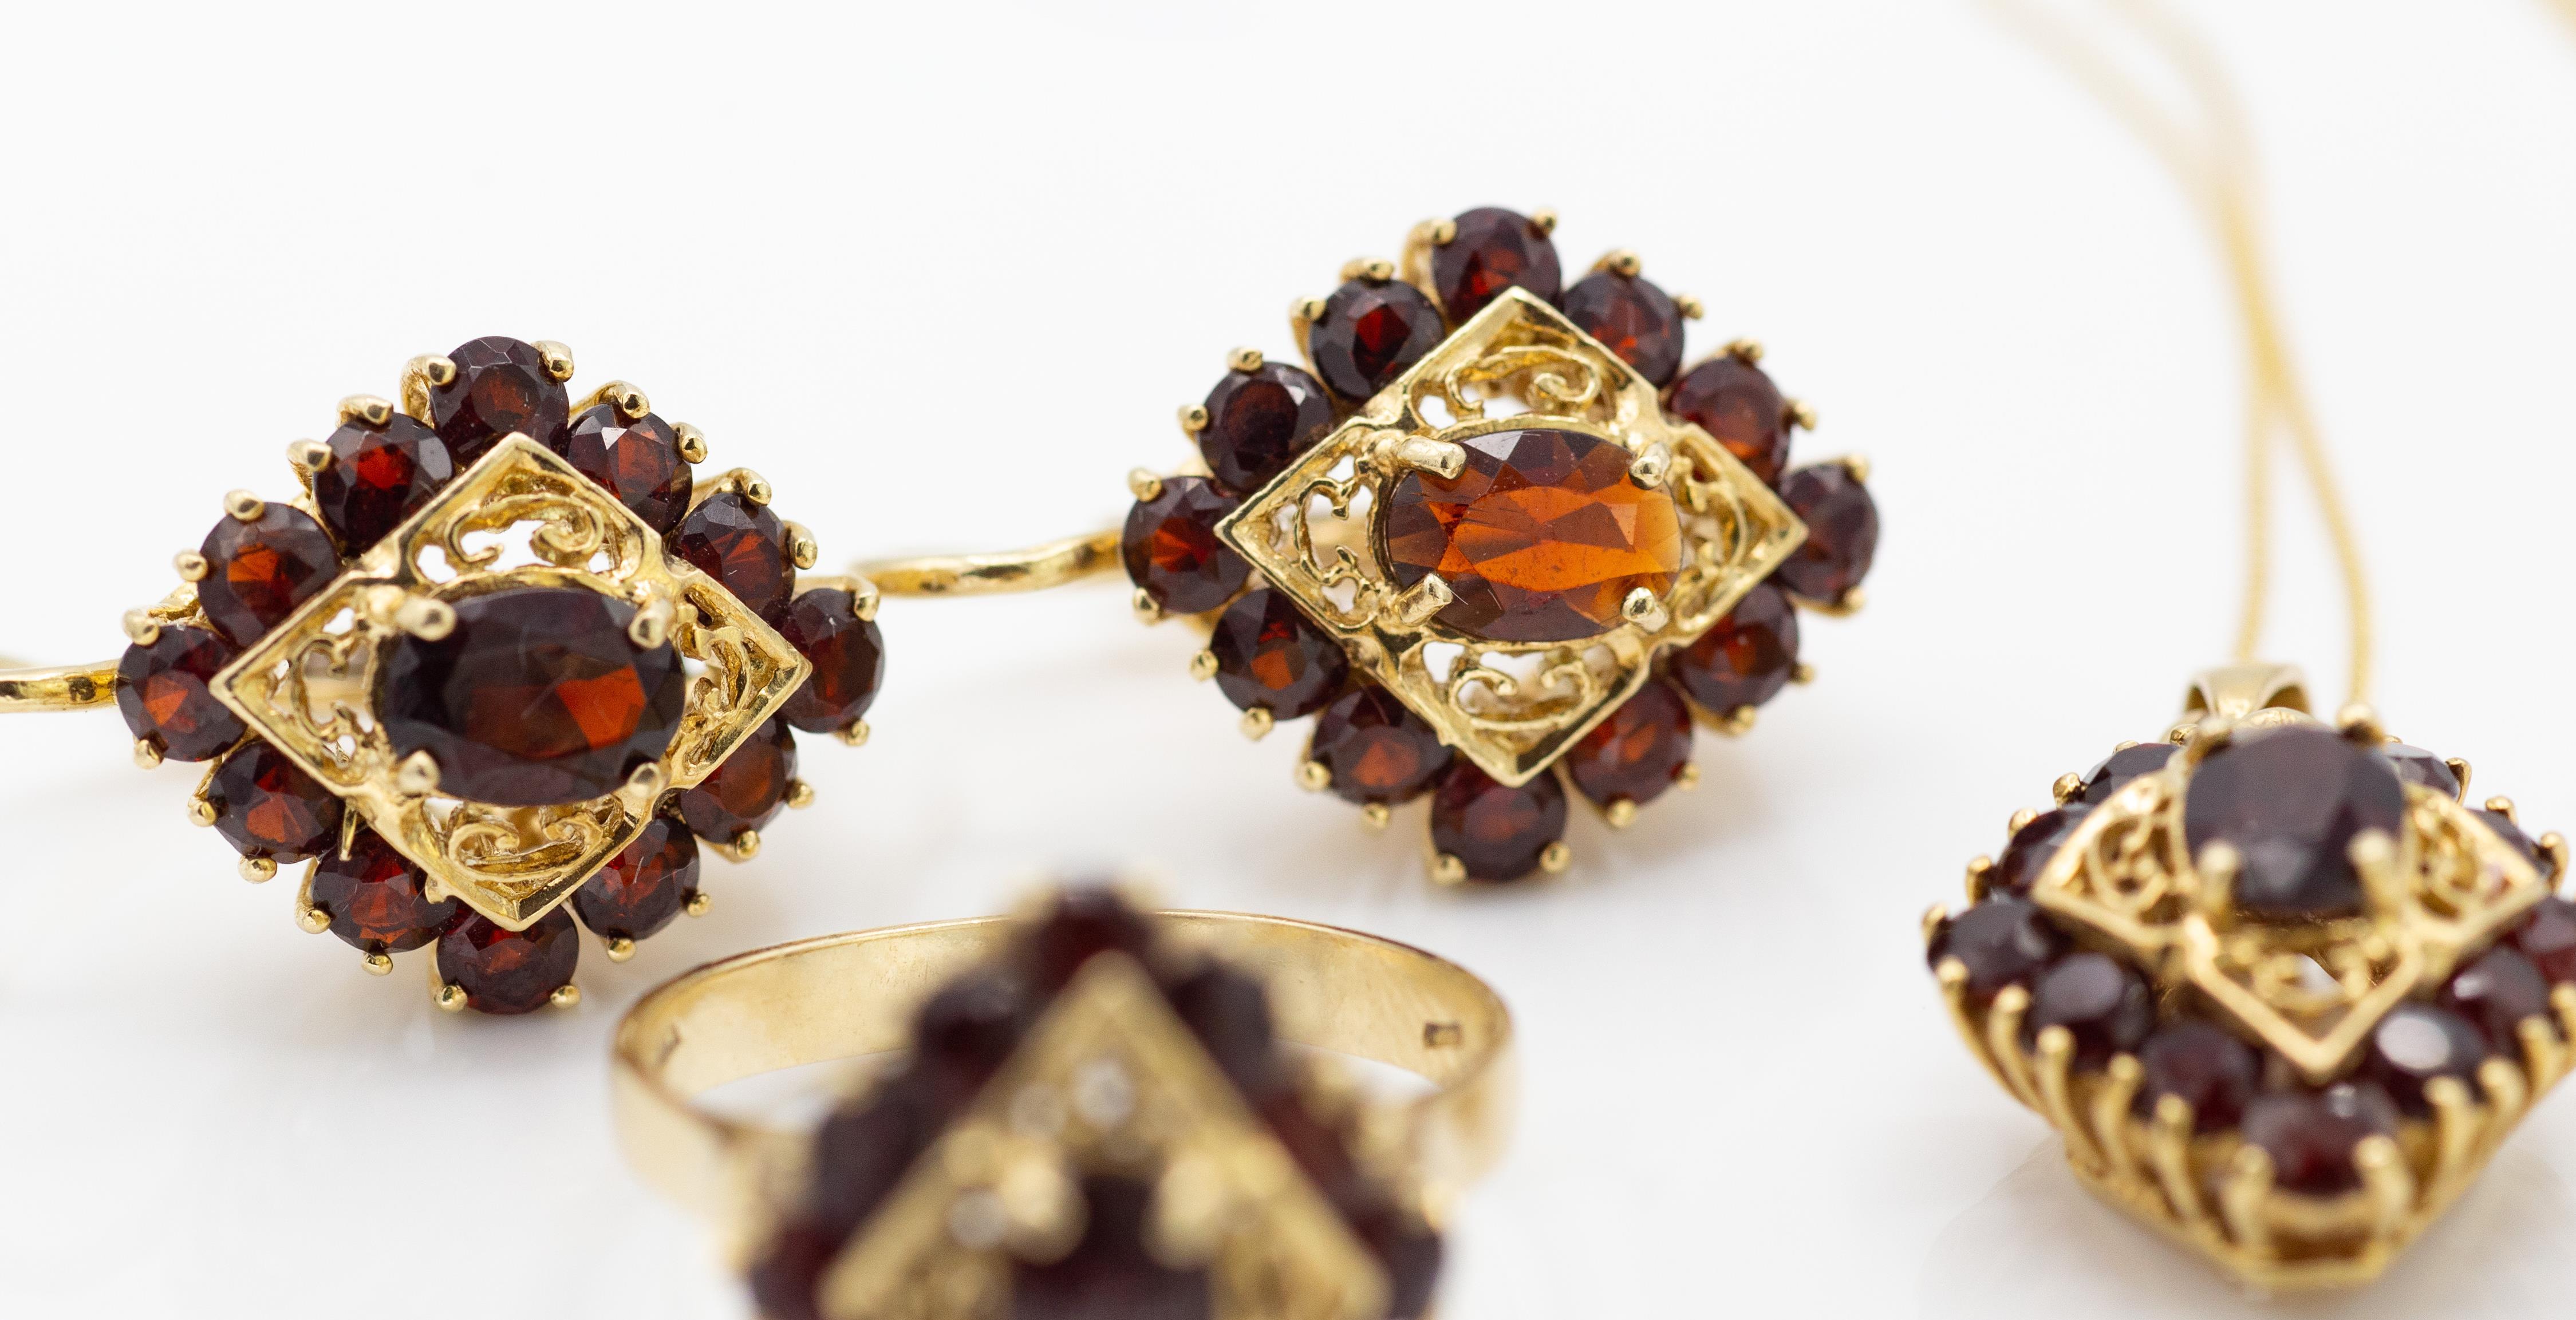 14ct Gold & Garnet Jewellery Suite - Ring - Earrings & Necklace - Image 3 of 9